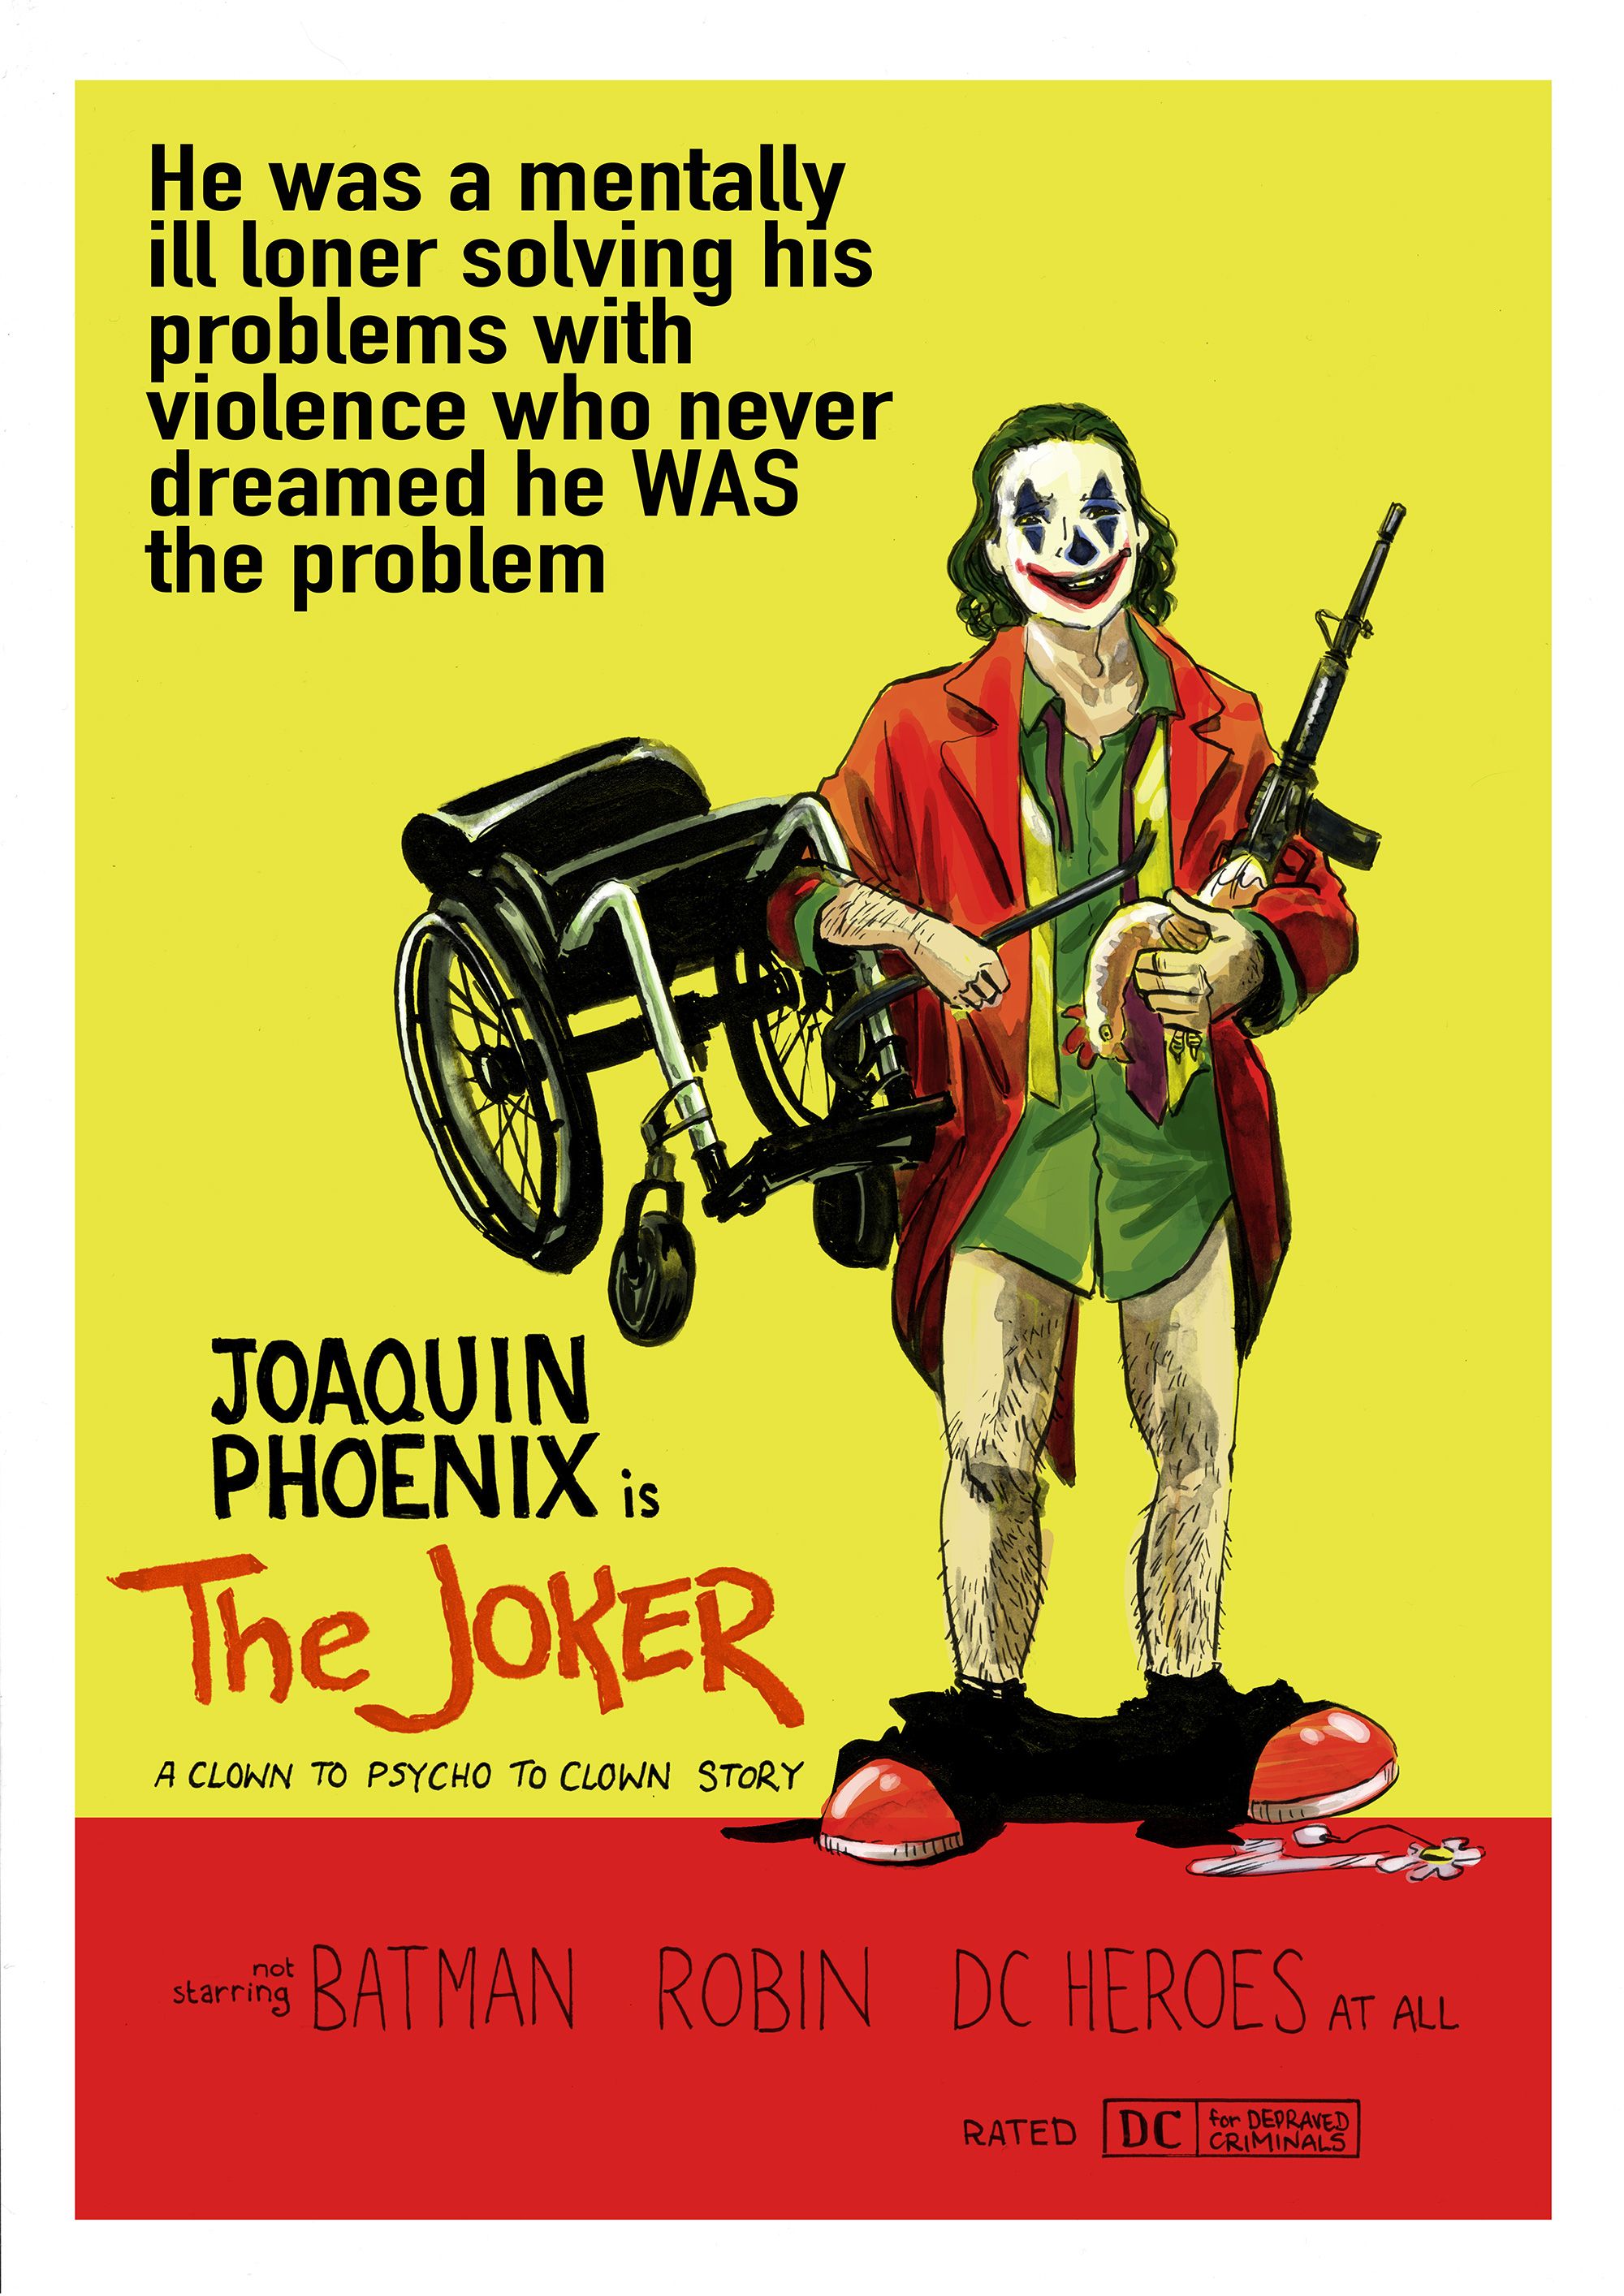 What If The Joker Starred In The Jerk?